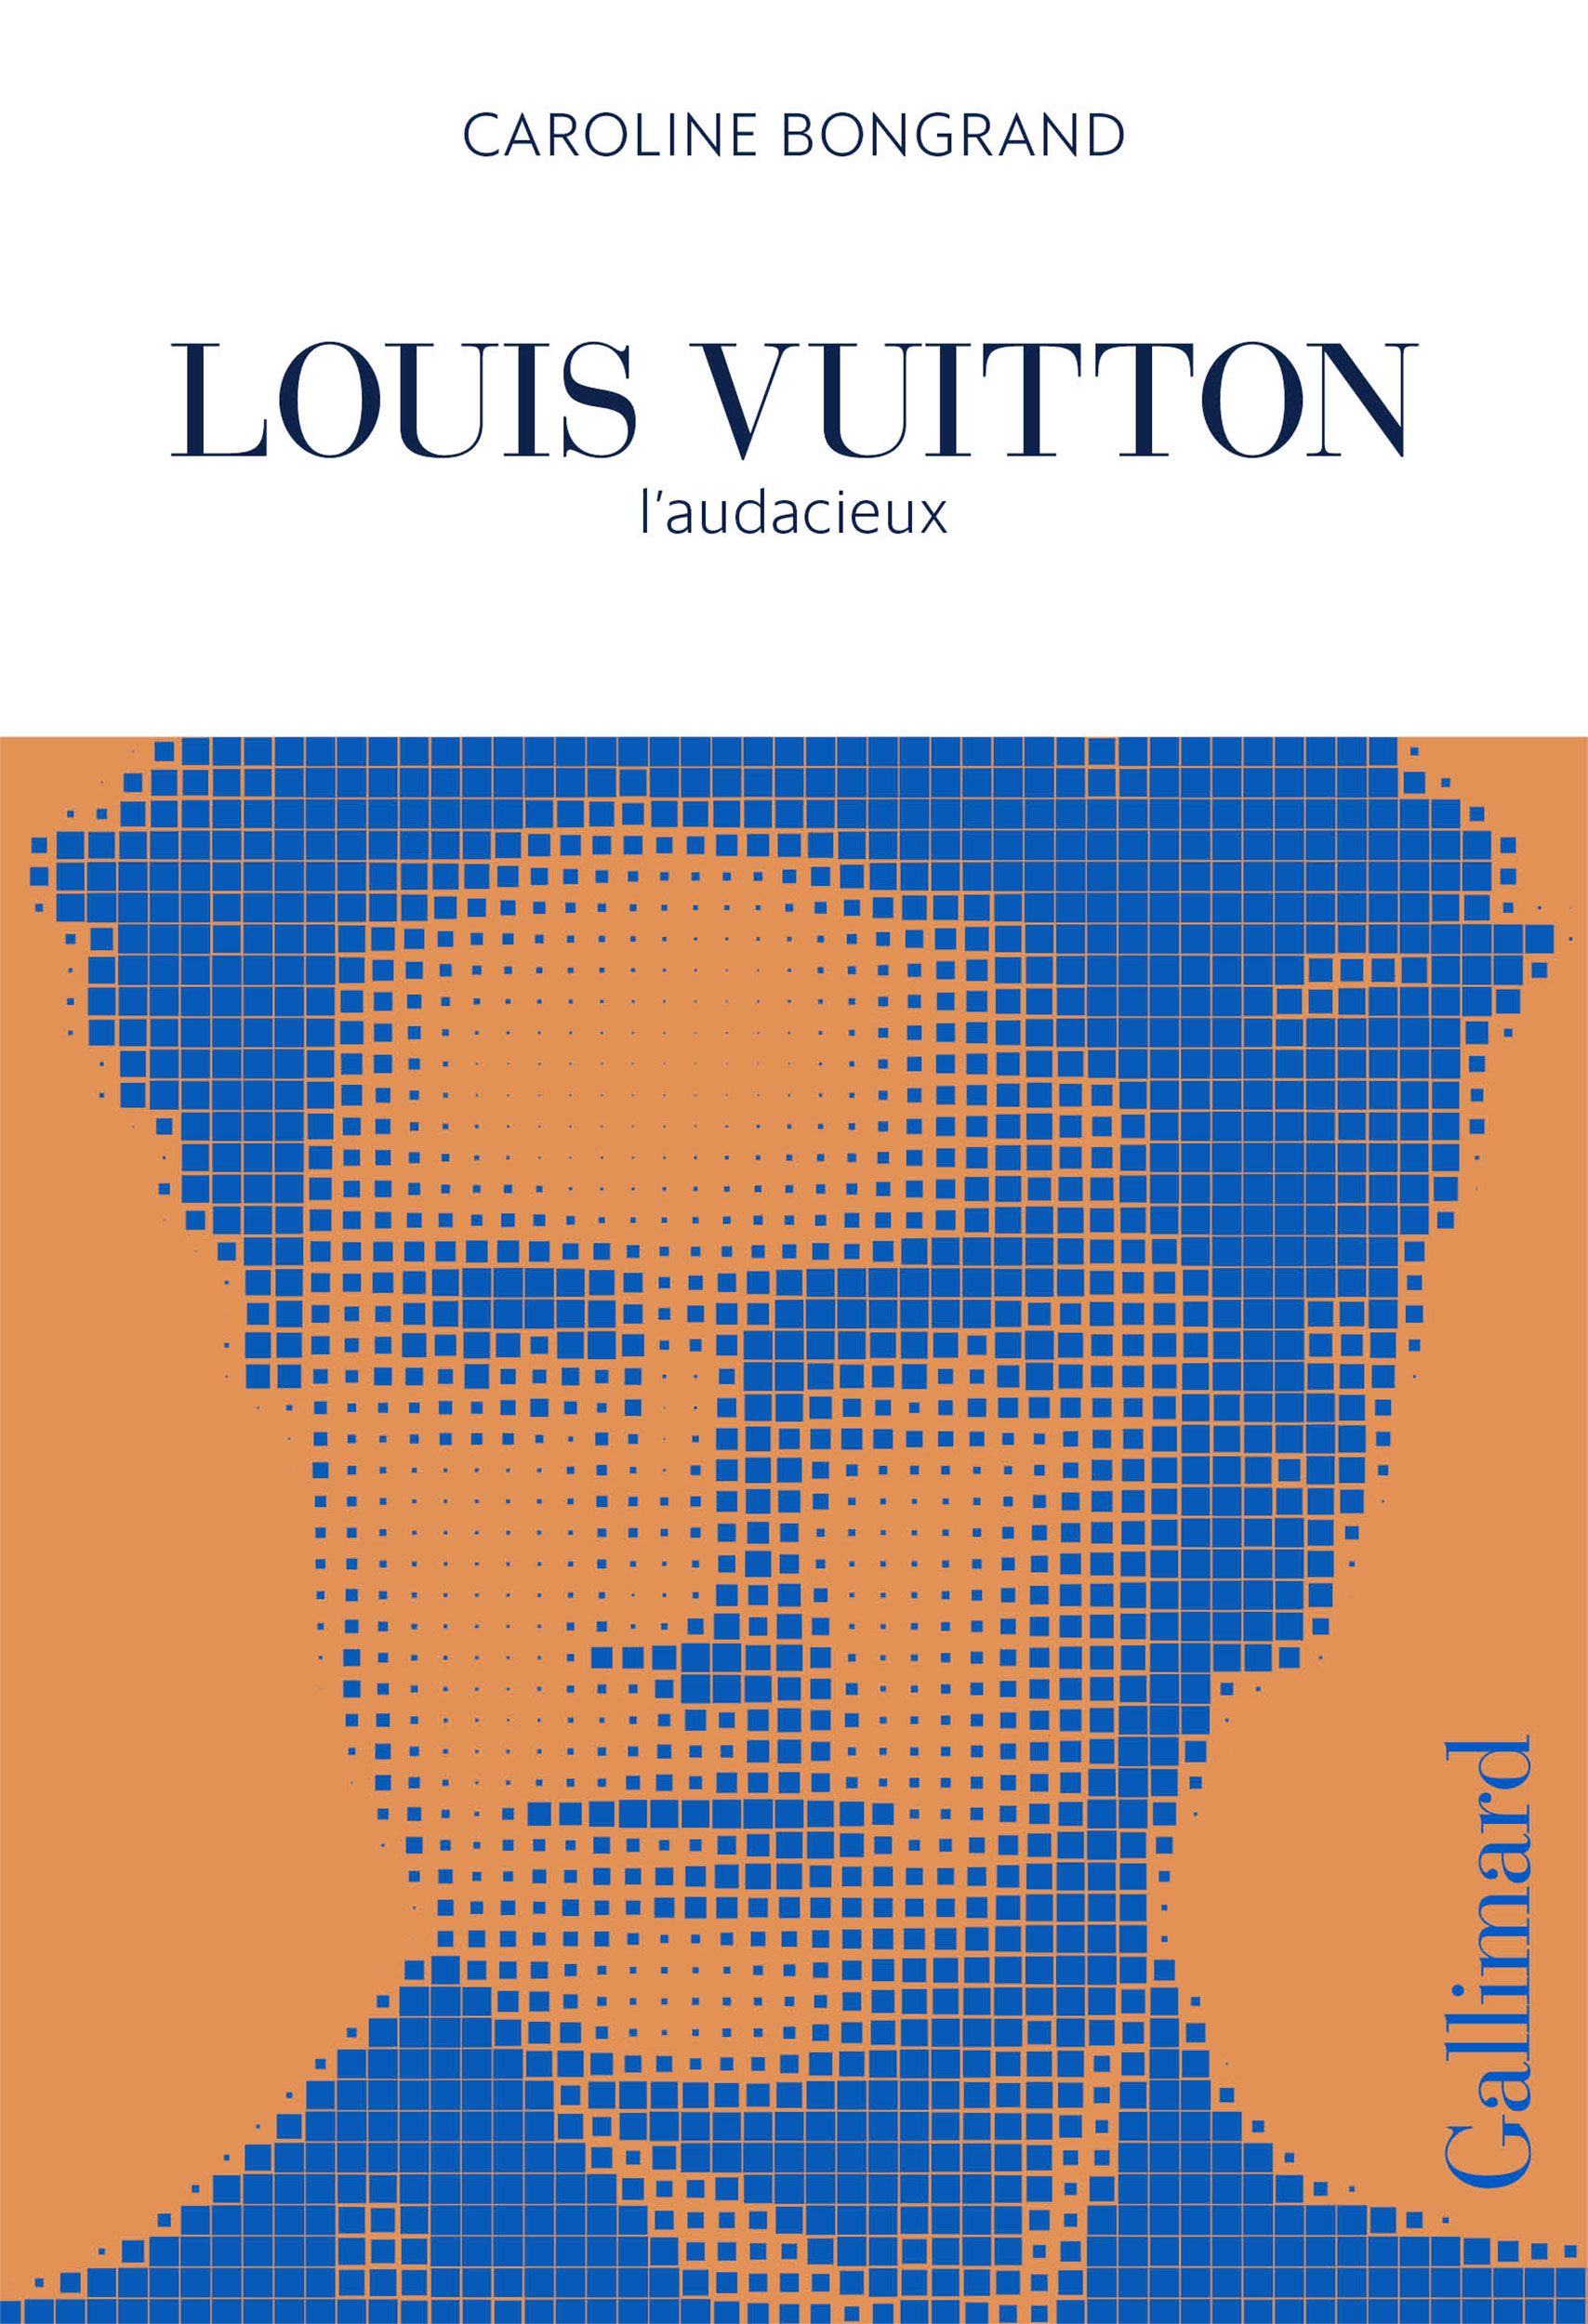 Birth of a Legend: Louis Vuitton celebrates founder's 200th birthday -  Magnifissance